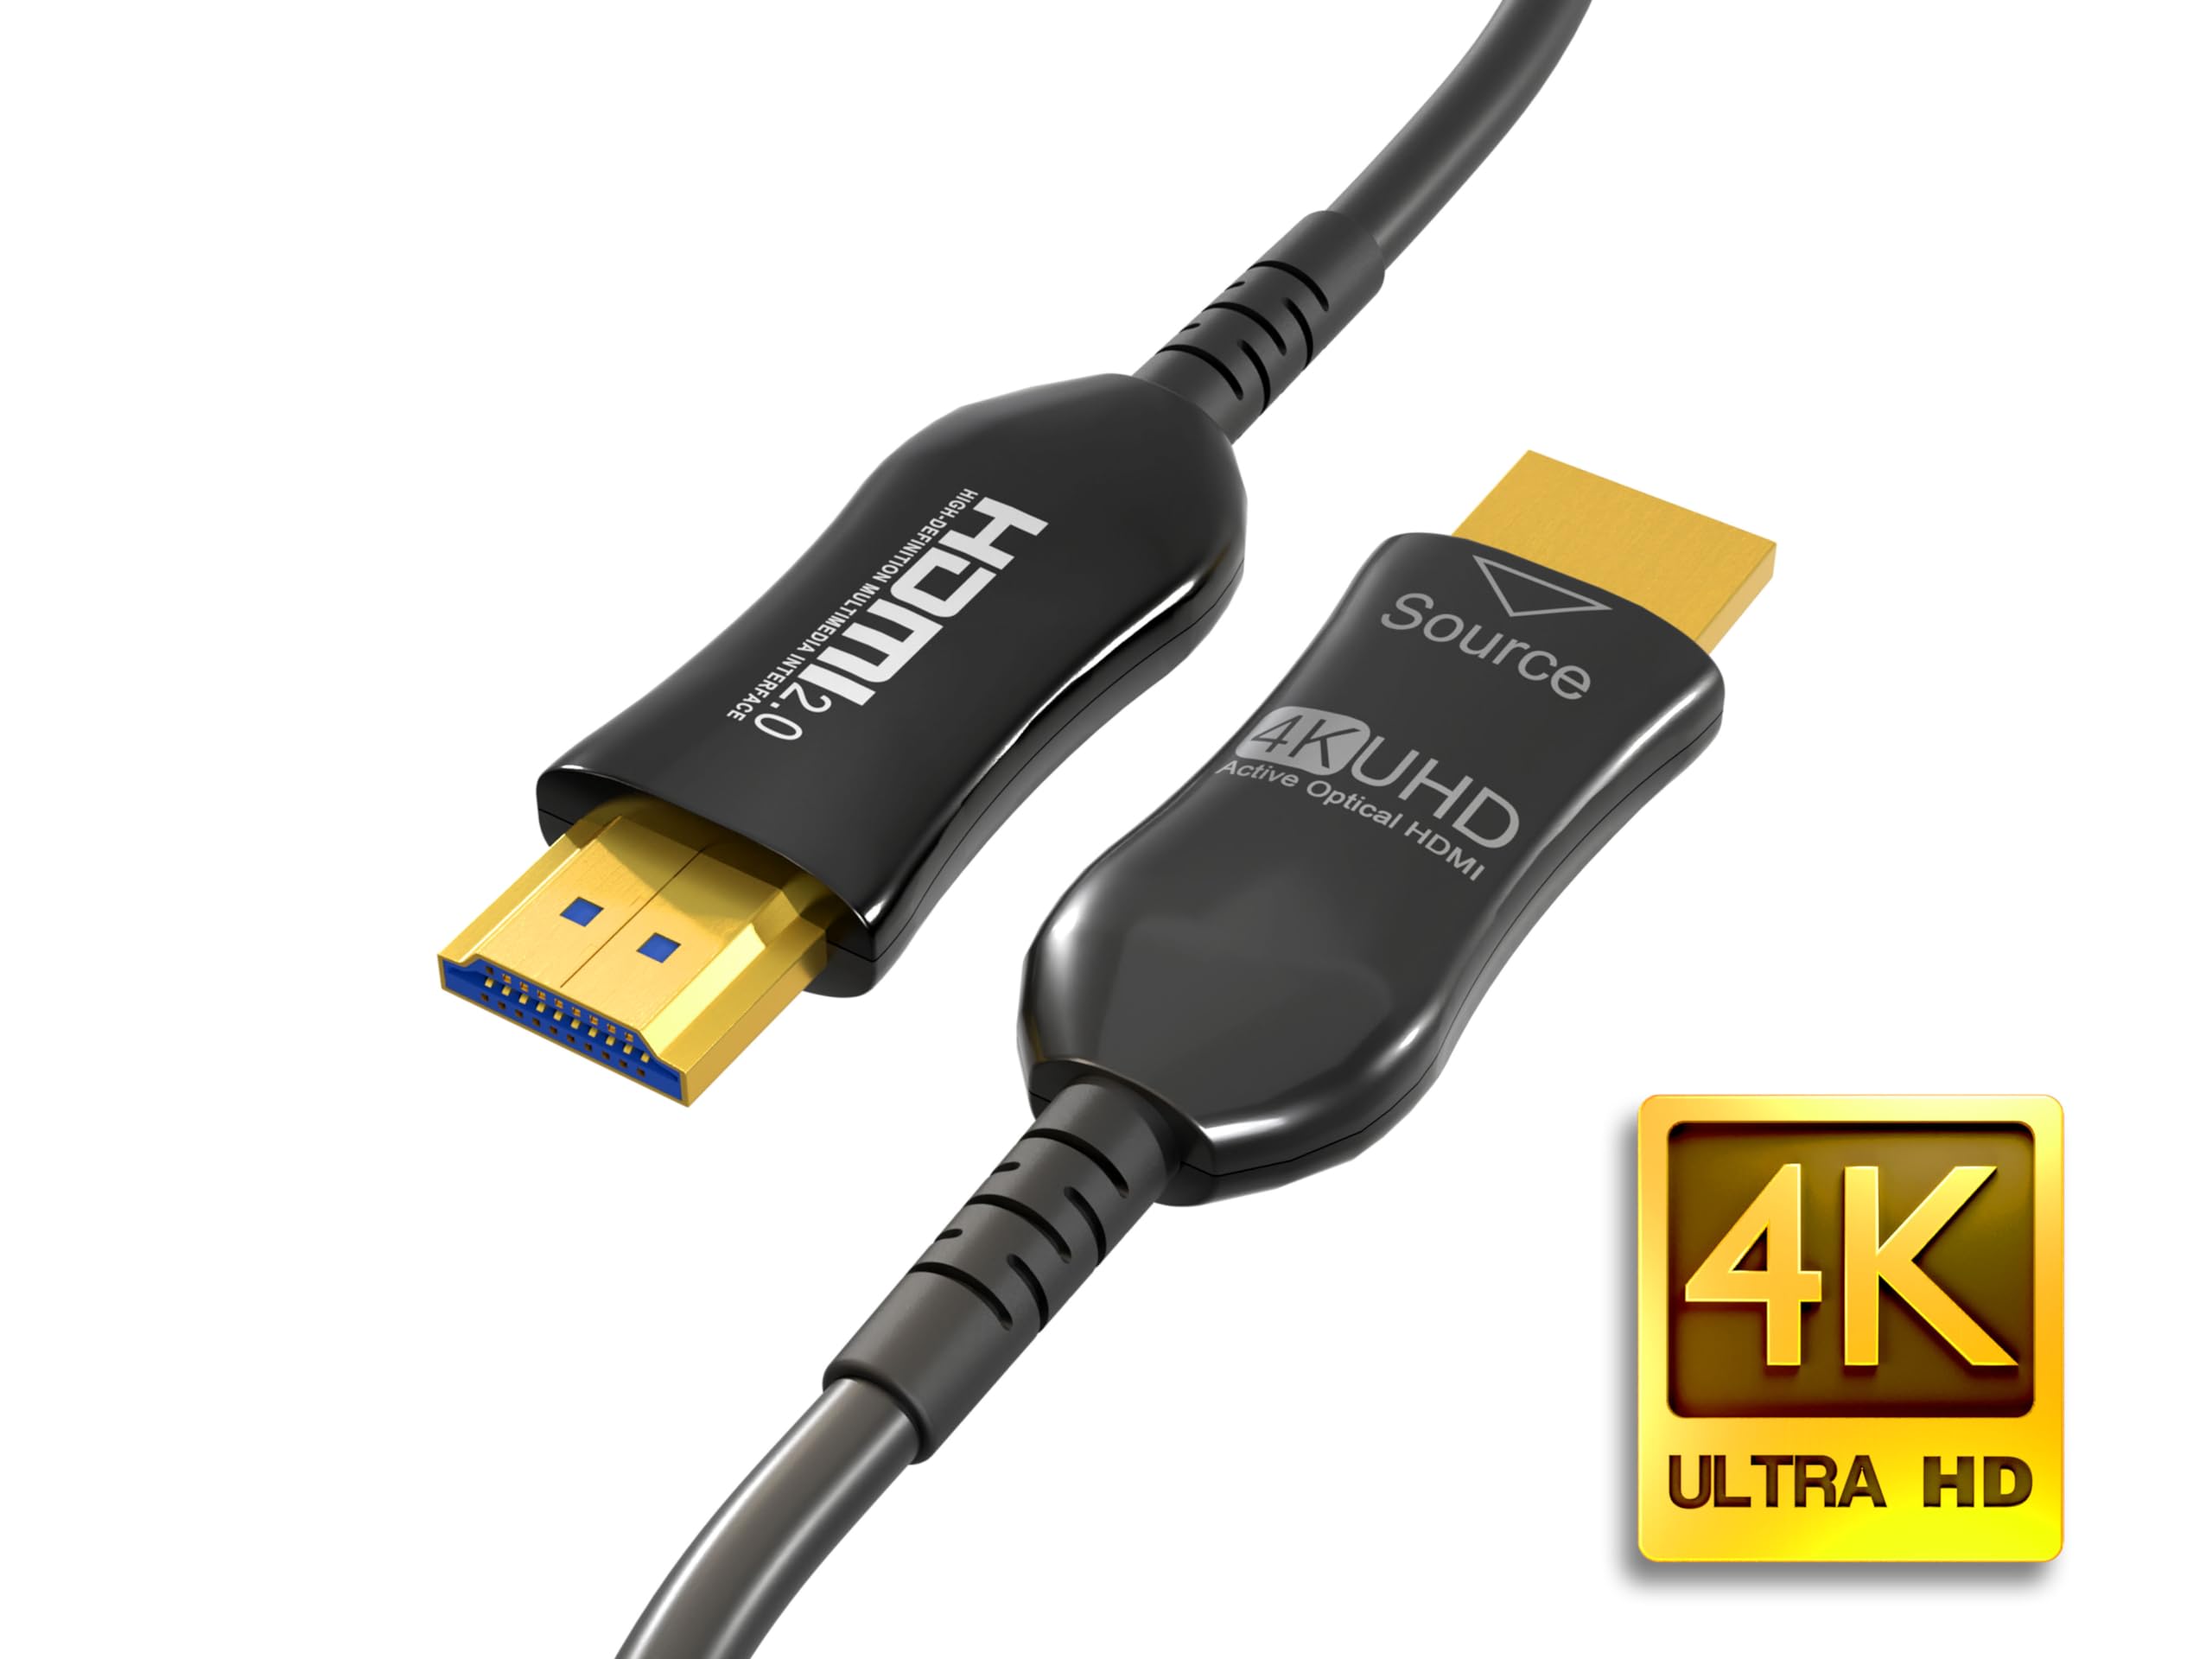 Cablelera 4K UHD CMP HDMI Cable 2.0, Hybrid Active Optical Cable (AOC), 18Gbps Hyper Fast Long Distance Data Transmission, ARC, HDCP, NVIDIA, AMD, PS5, Xbox, Gaming, Movie, Plenum Rated, 50ft